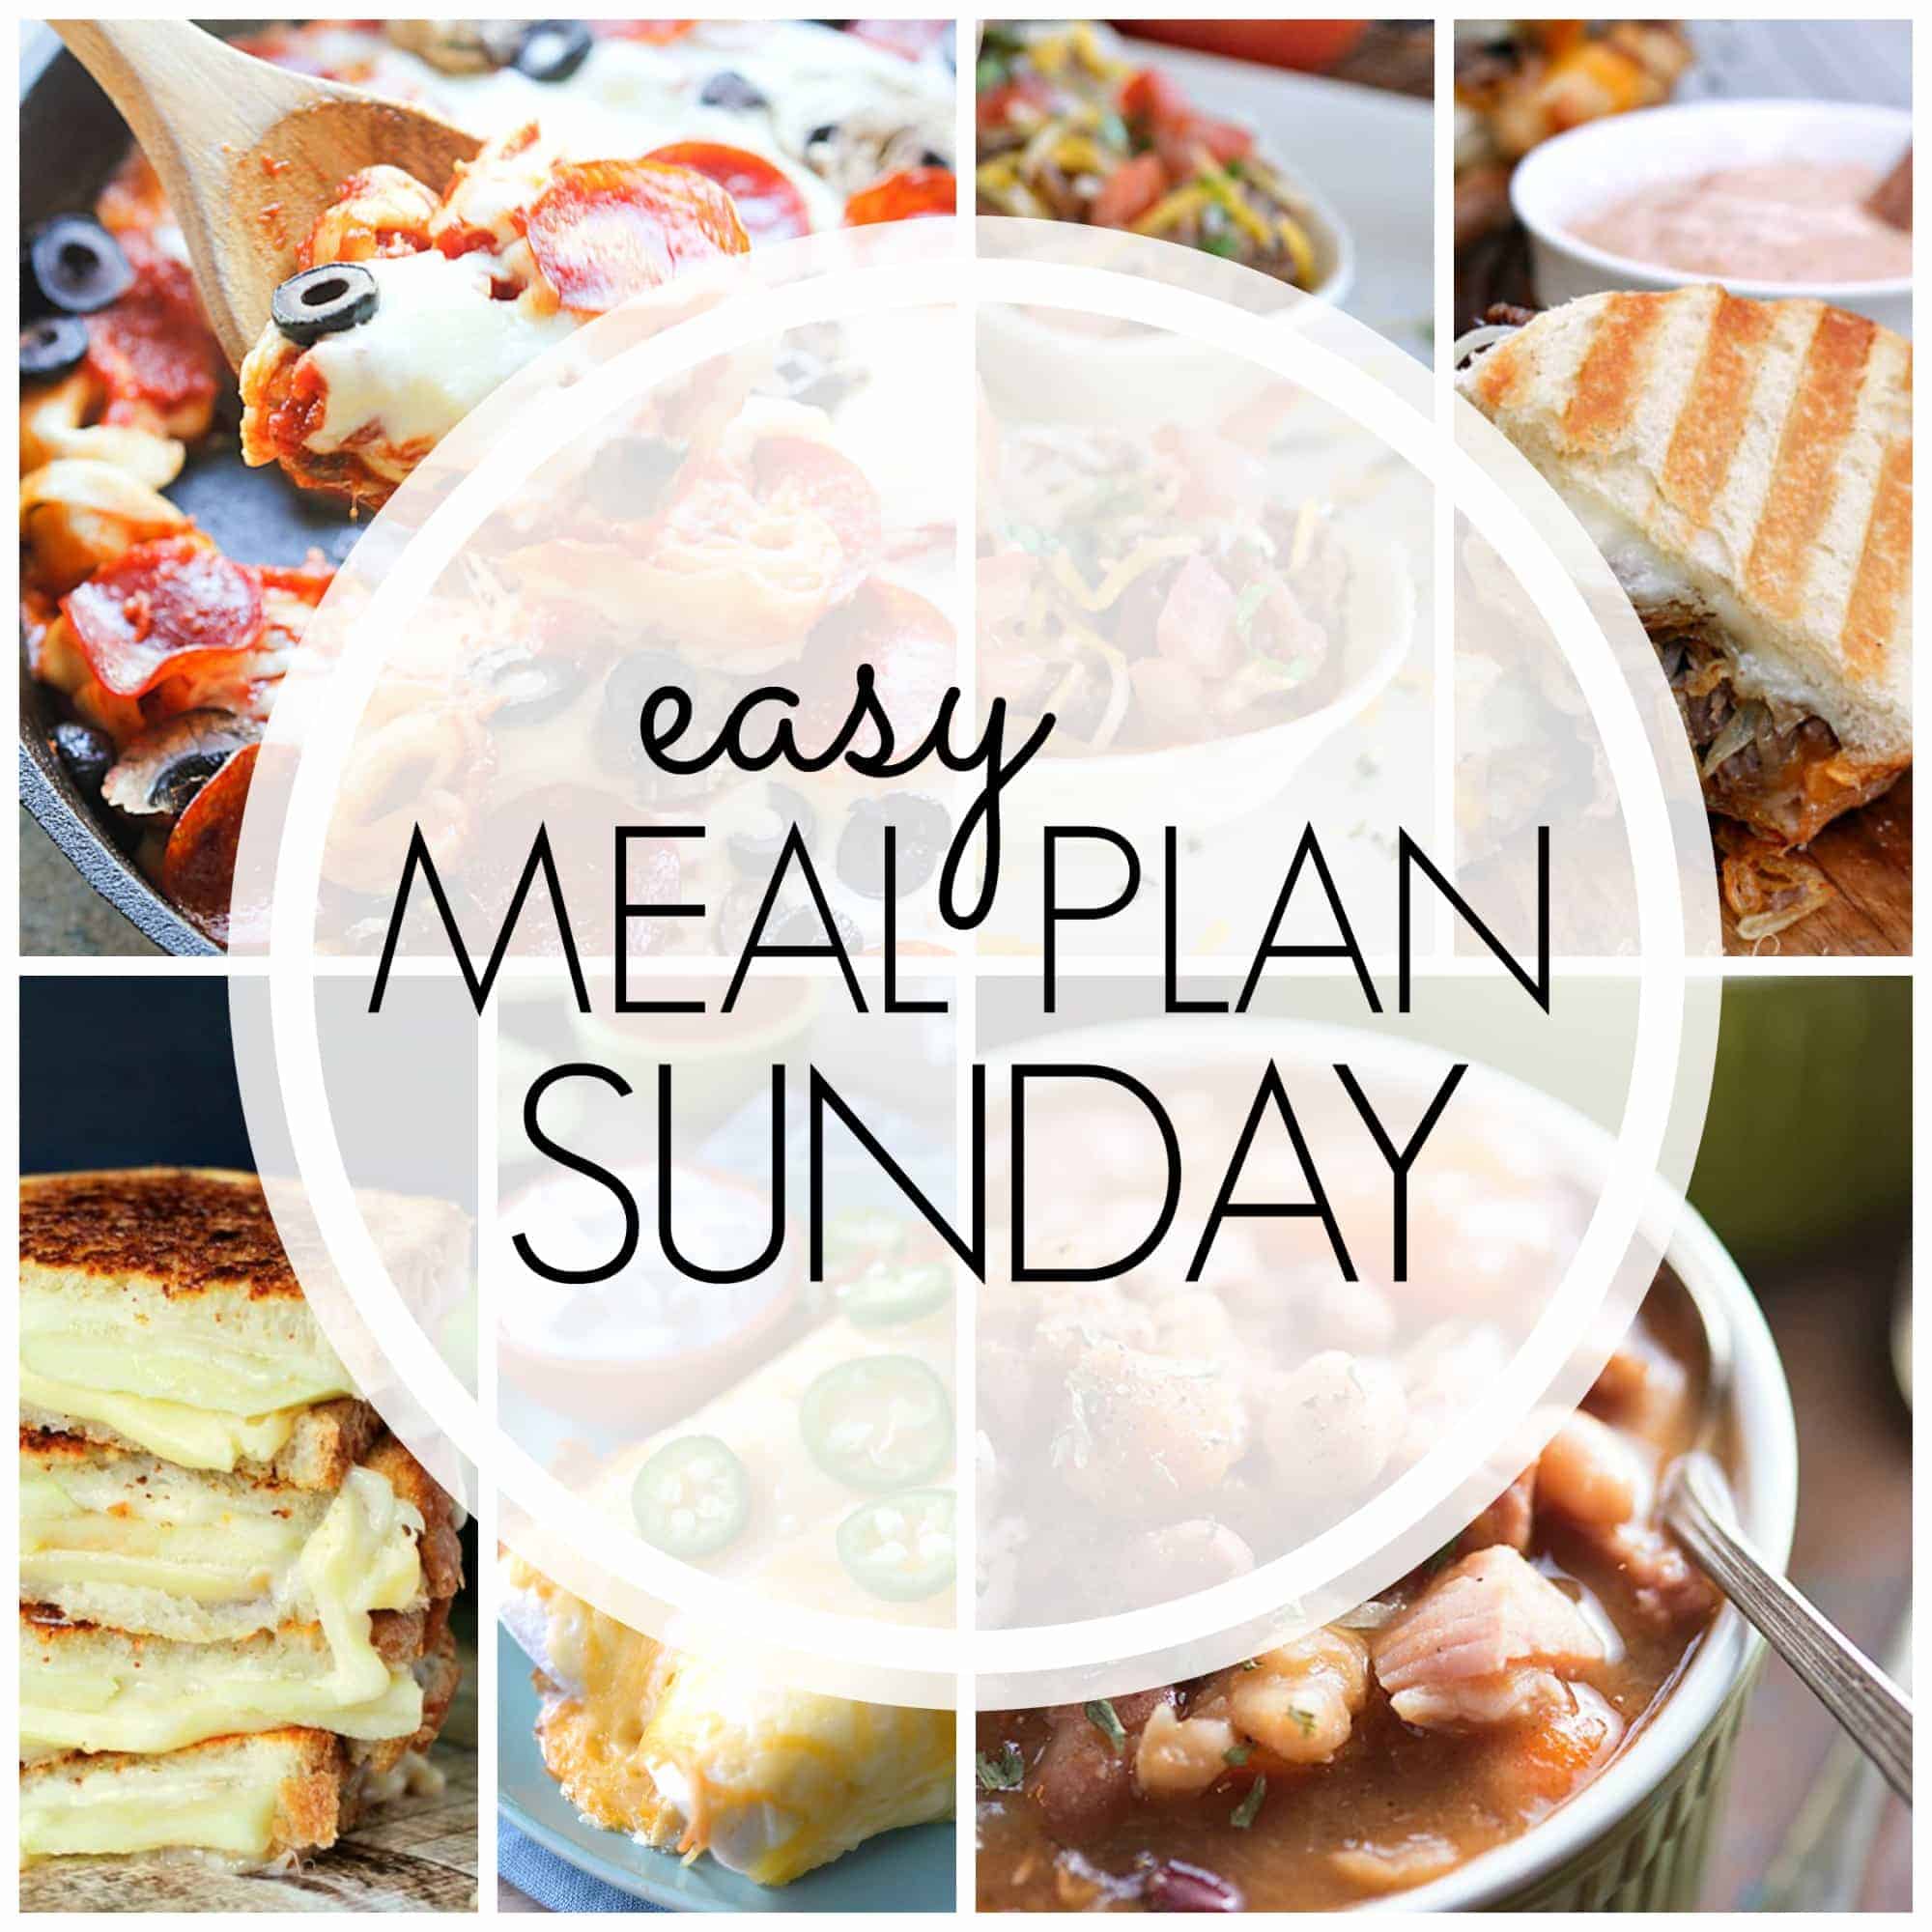 With Easy Meal Plan Sunday Week 72 - six dinners, two desserts and a breakfast recipe will help you remove the guesswork from this week's meal planning.